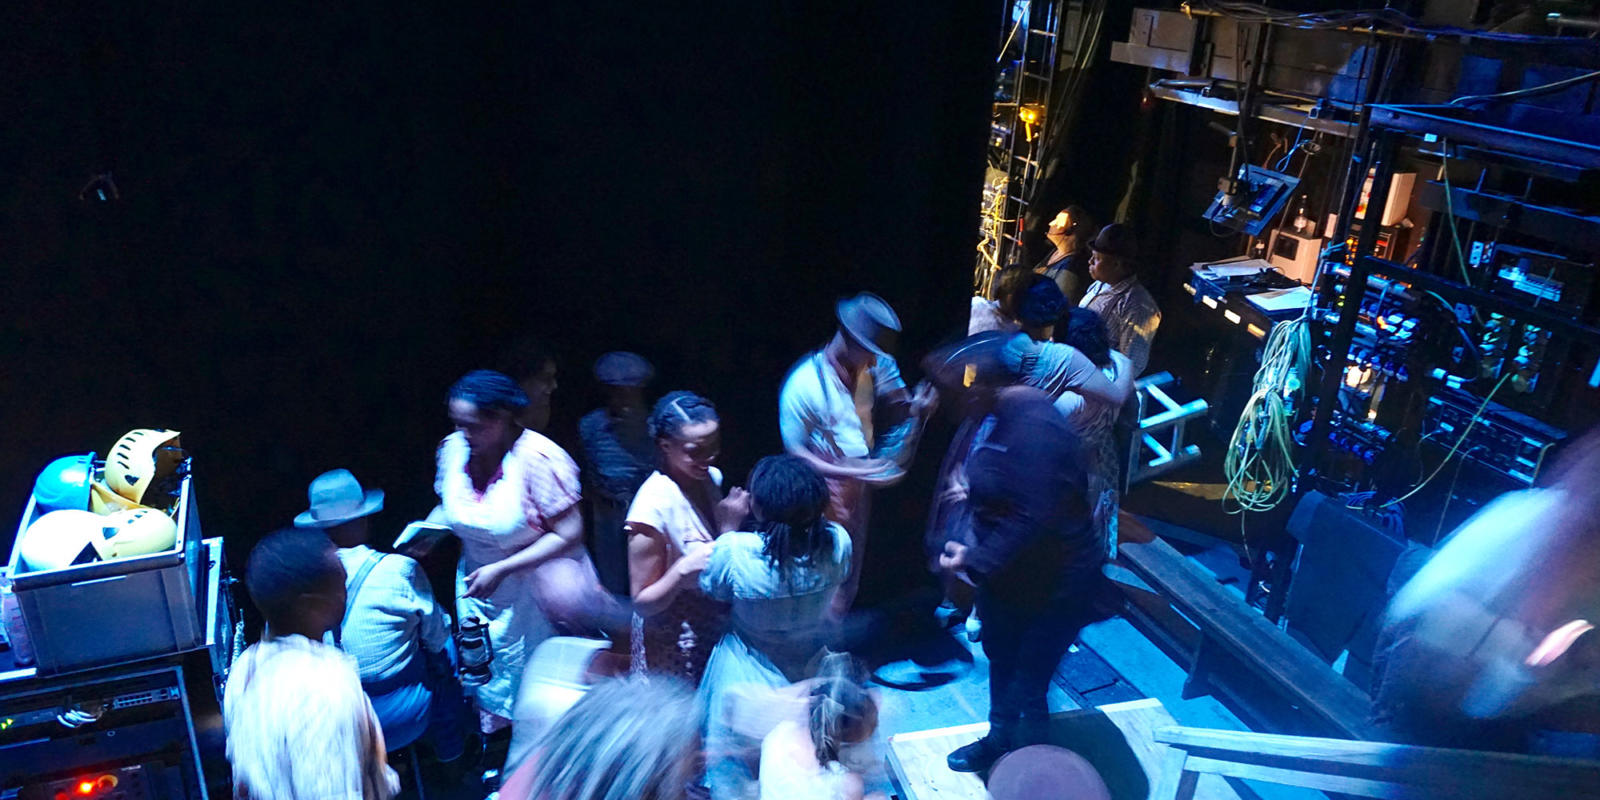 ENO Porgy and Bess: Members of the ensemble wait to go on stage for the thunderstorm scene